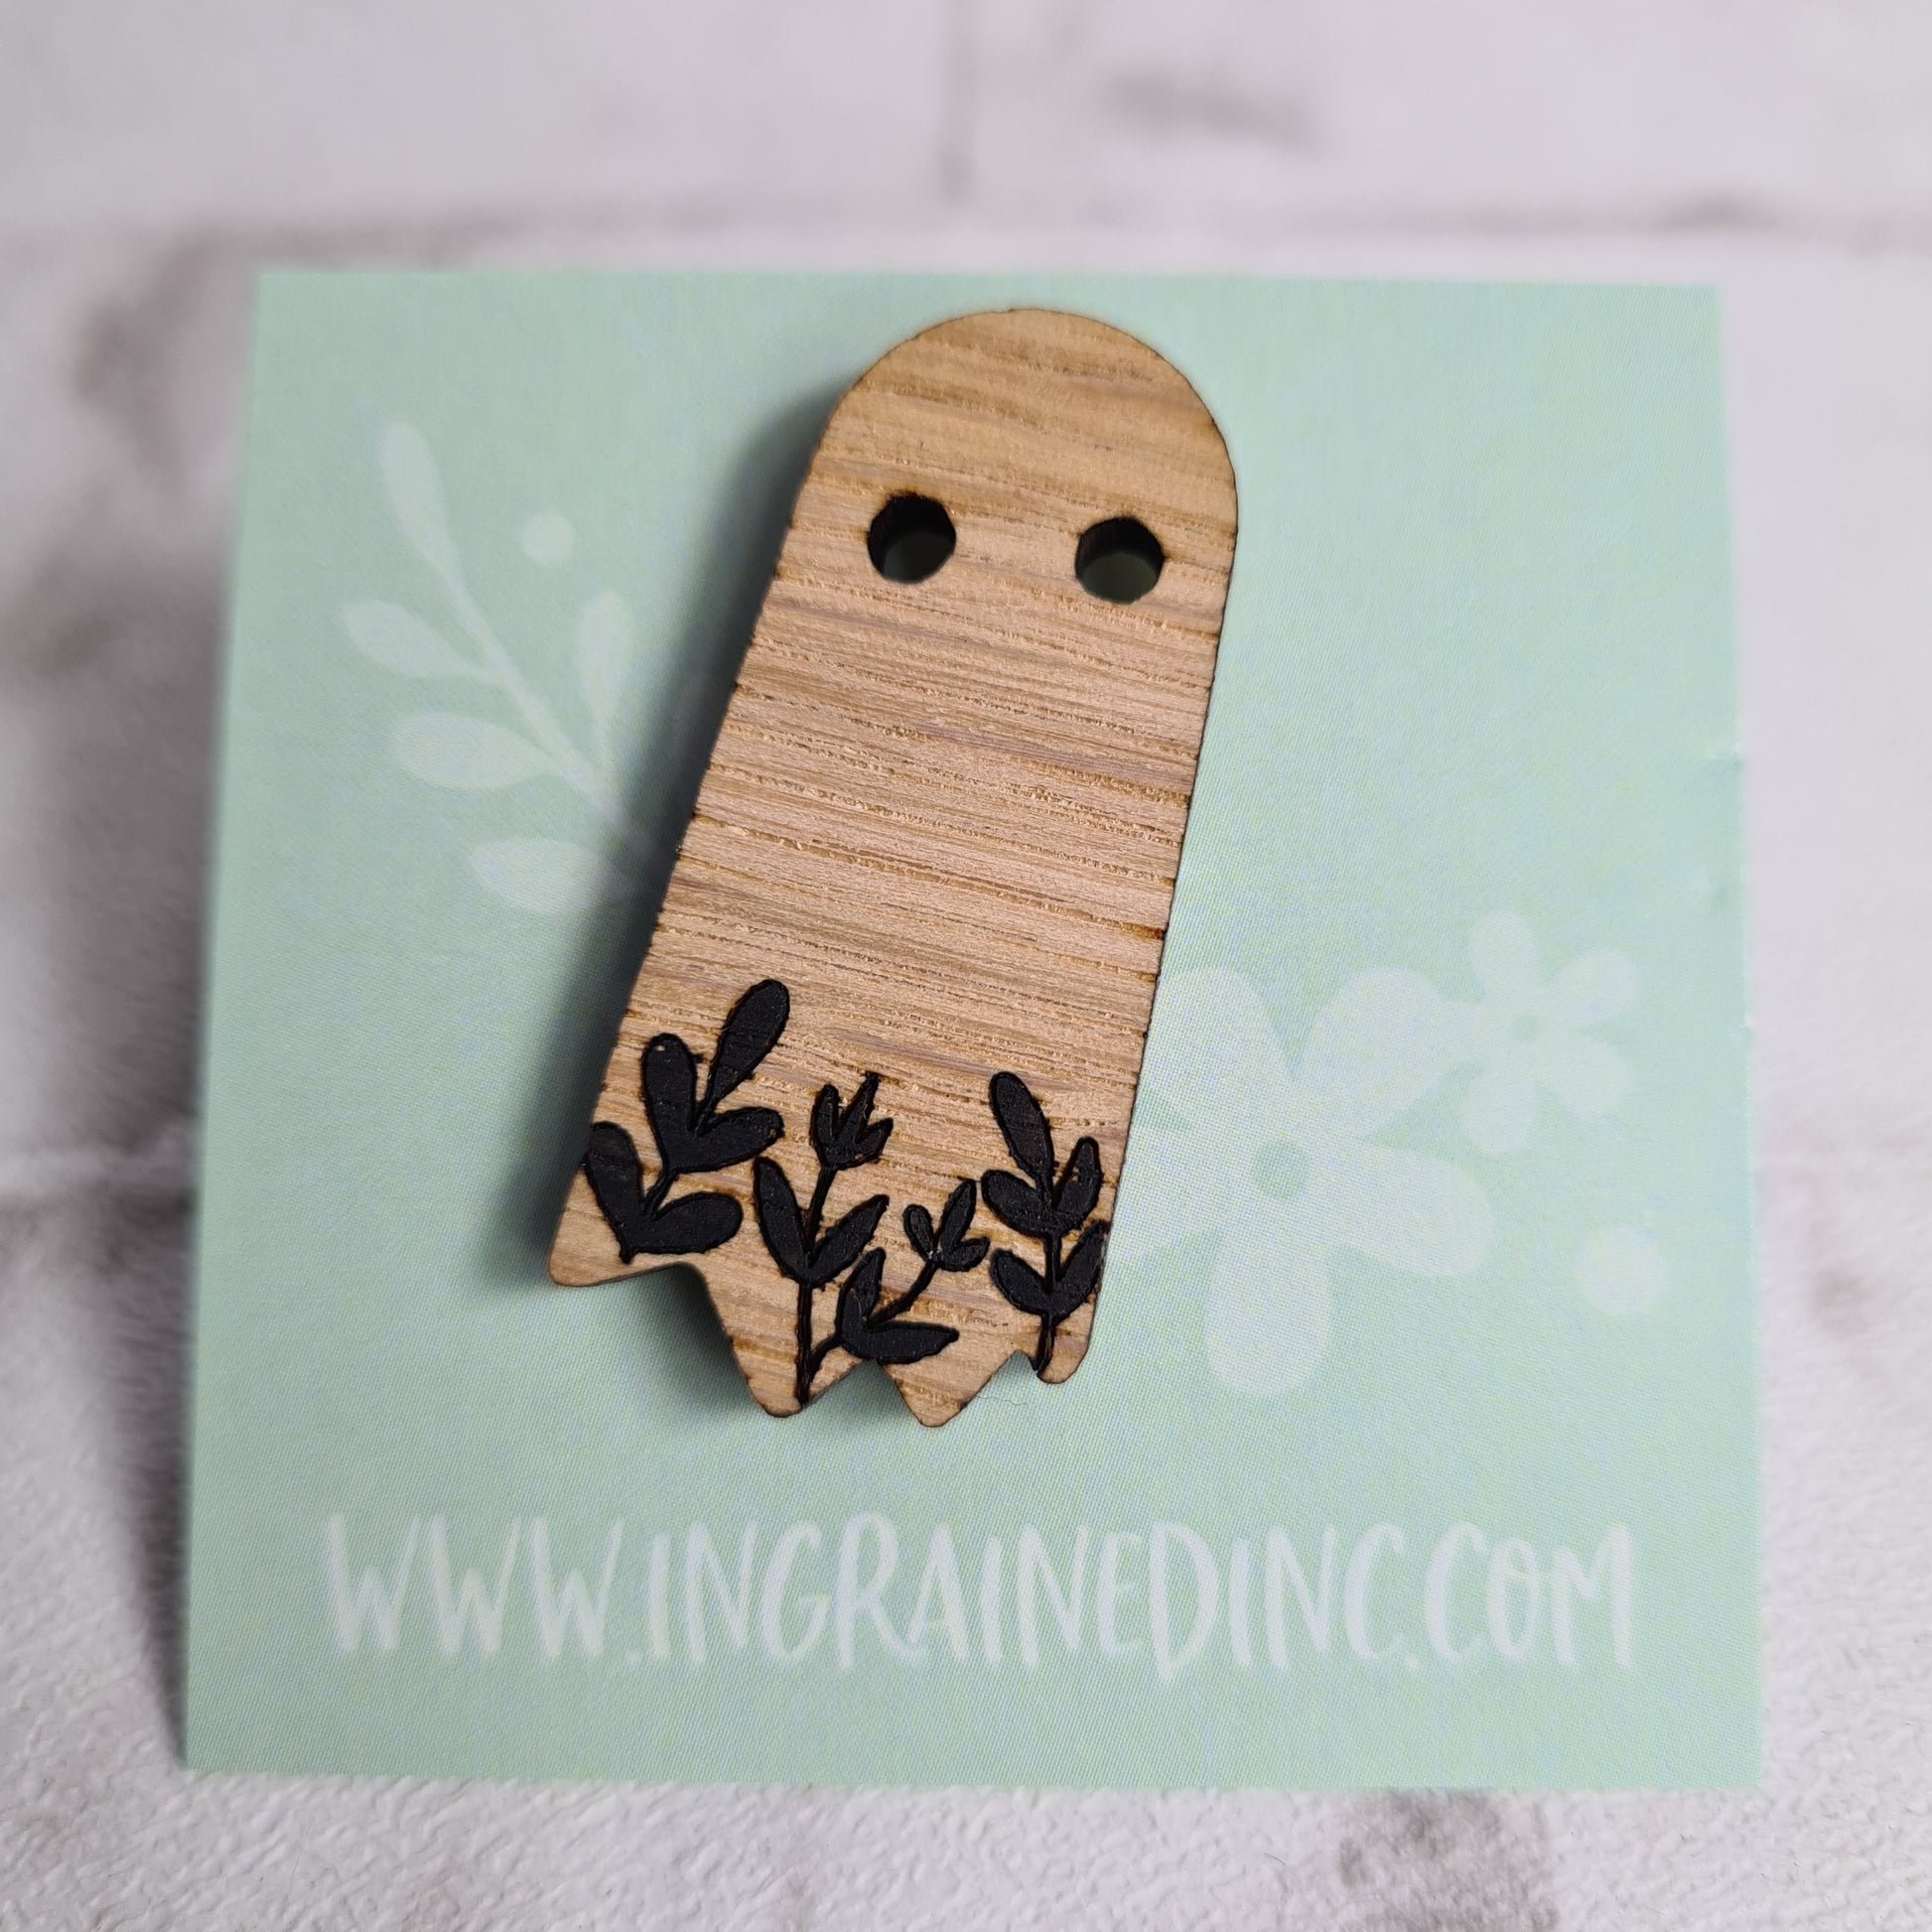 woodenspooky ghost pin brooch affixed to a backing card 